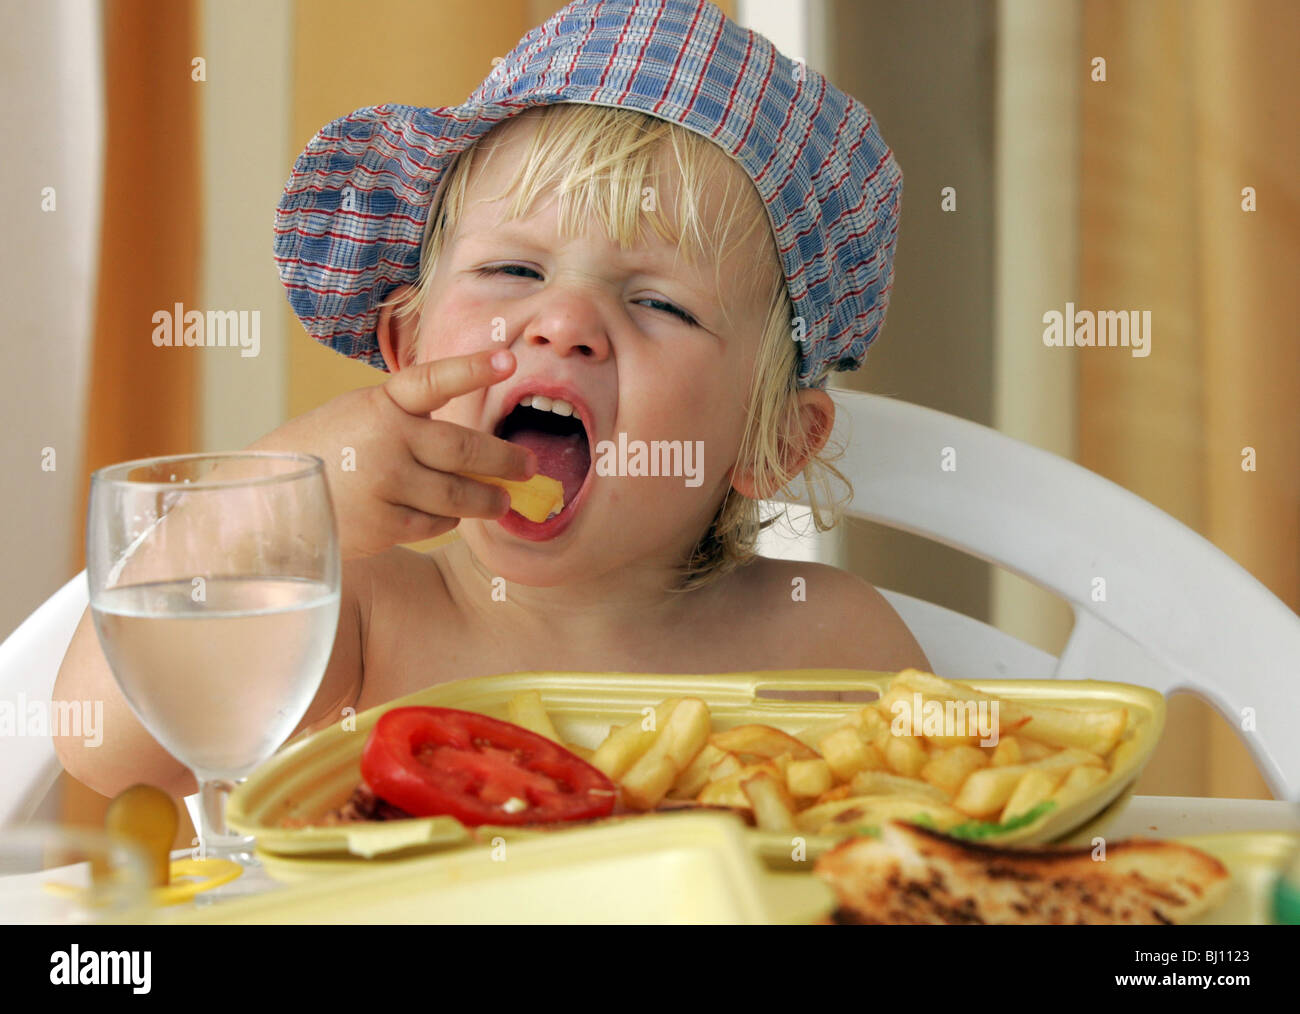 Child eating French fries Stock Photo